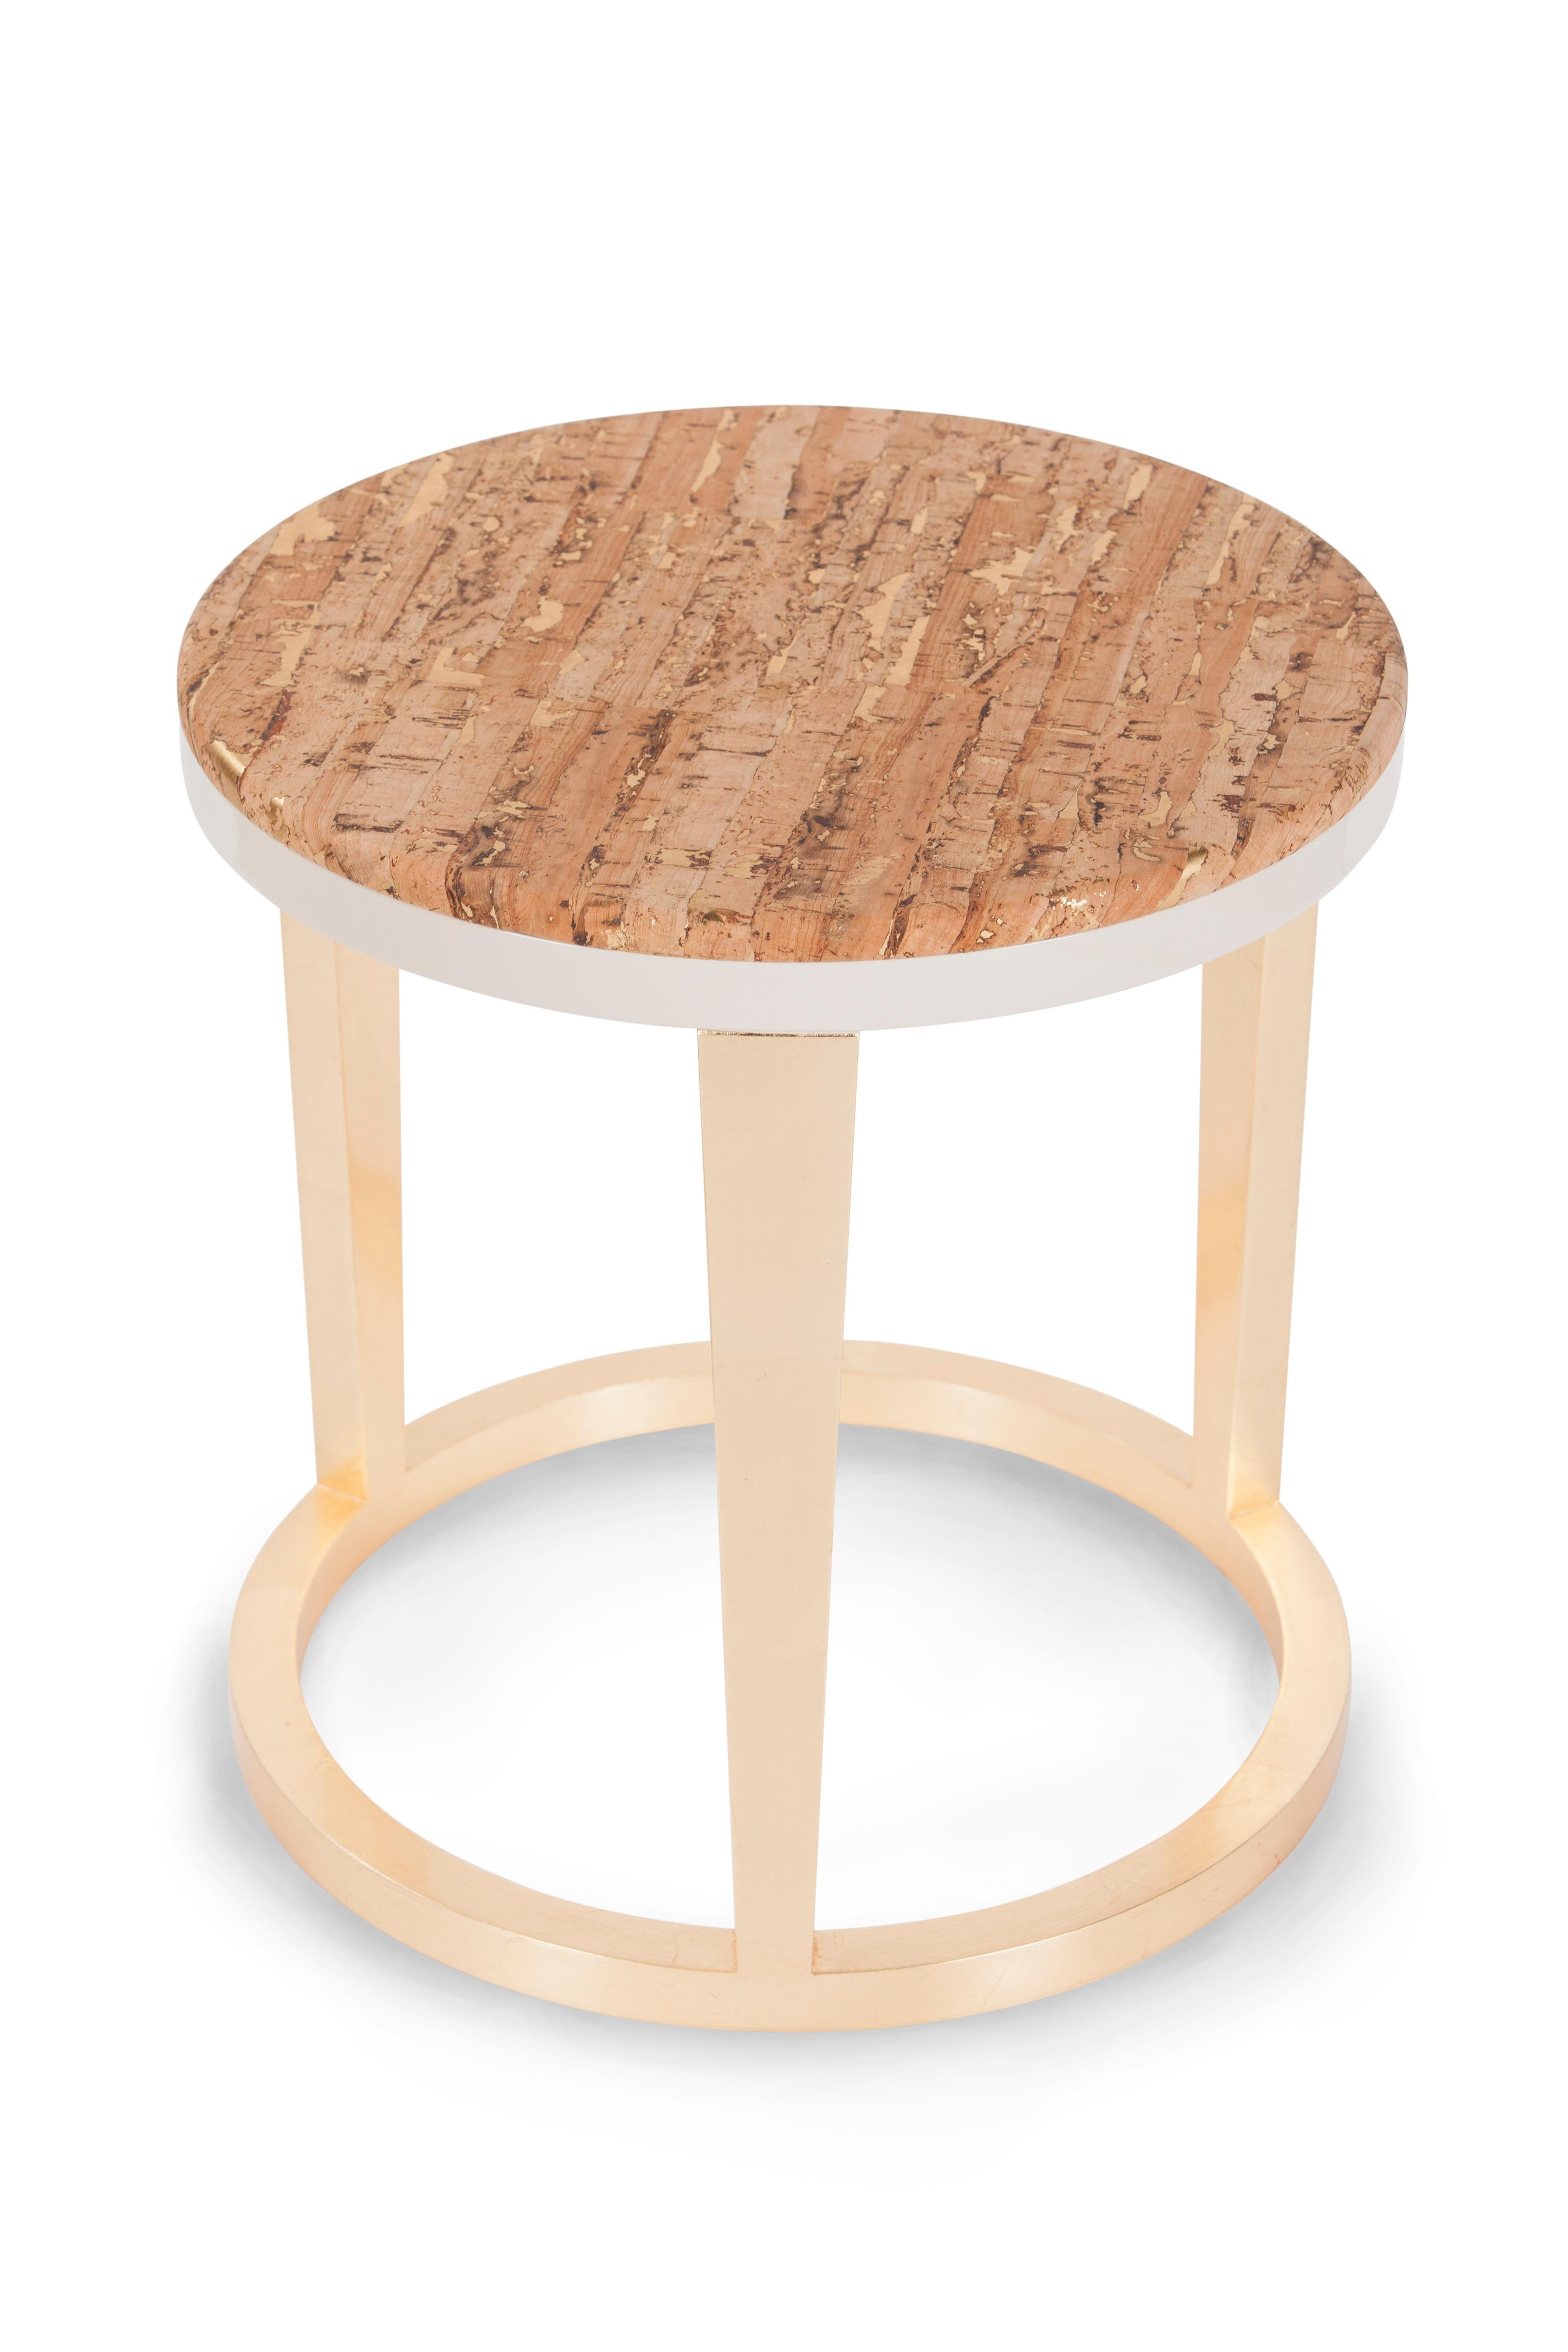 Rubi side table, Modern Collection, Handcrafted in Portugal - Europe by GF Modern.

Like a sparkling ruby ring, our magnificent Rubi side table ties in with the Art Deco style by representing the dawn of a new modern era.

The contrast between